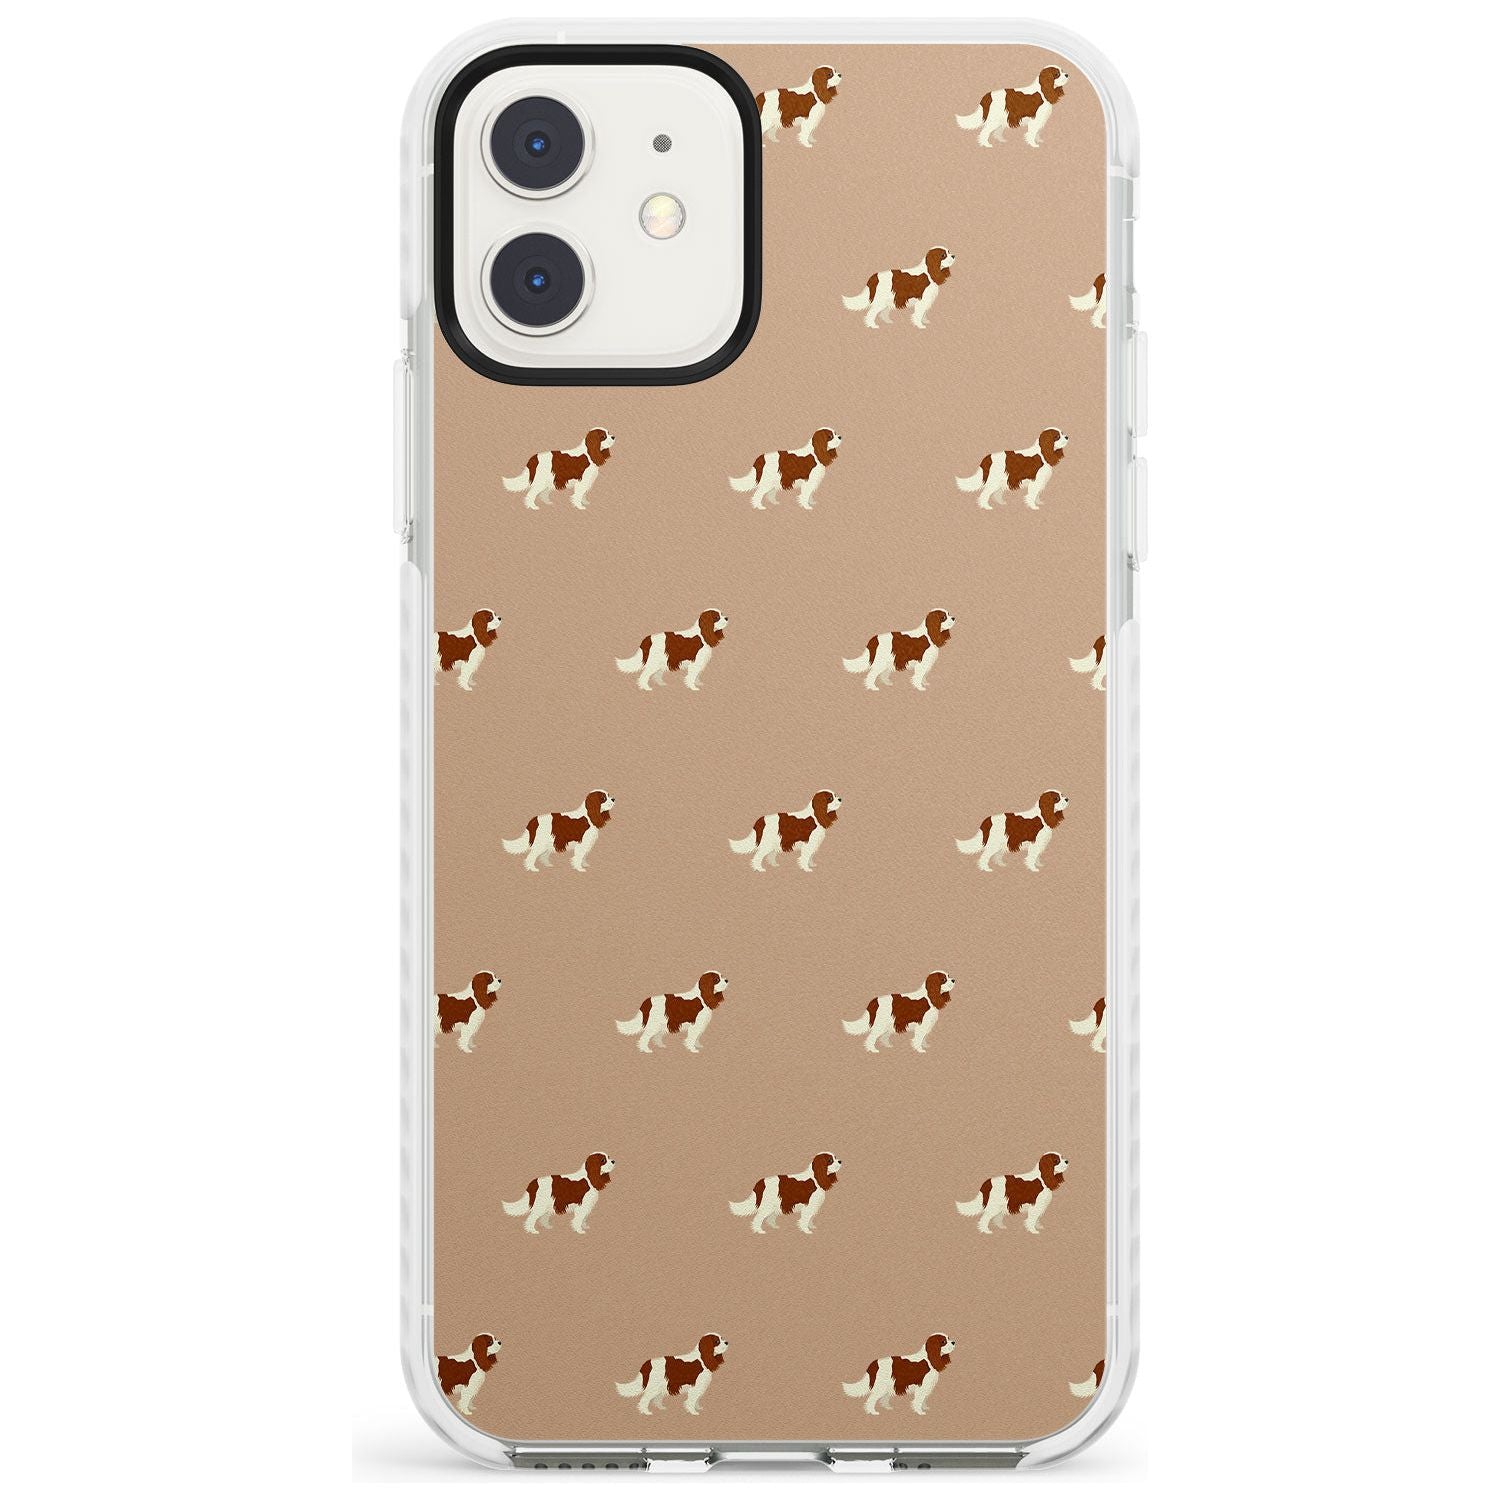 Cavalier King Charles Spaniel Pattern Impact Phone Case for iPhone 11